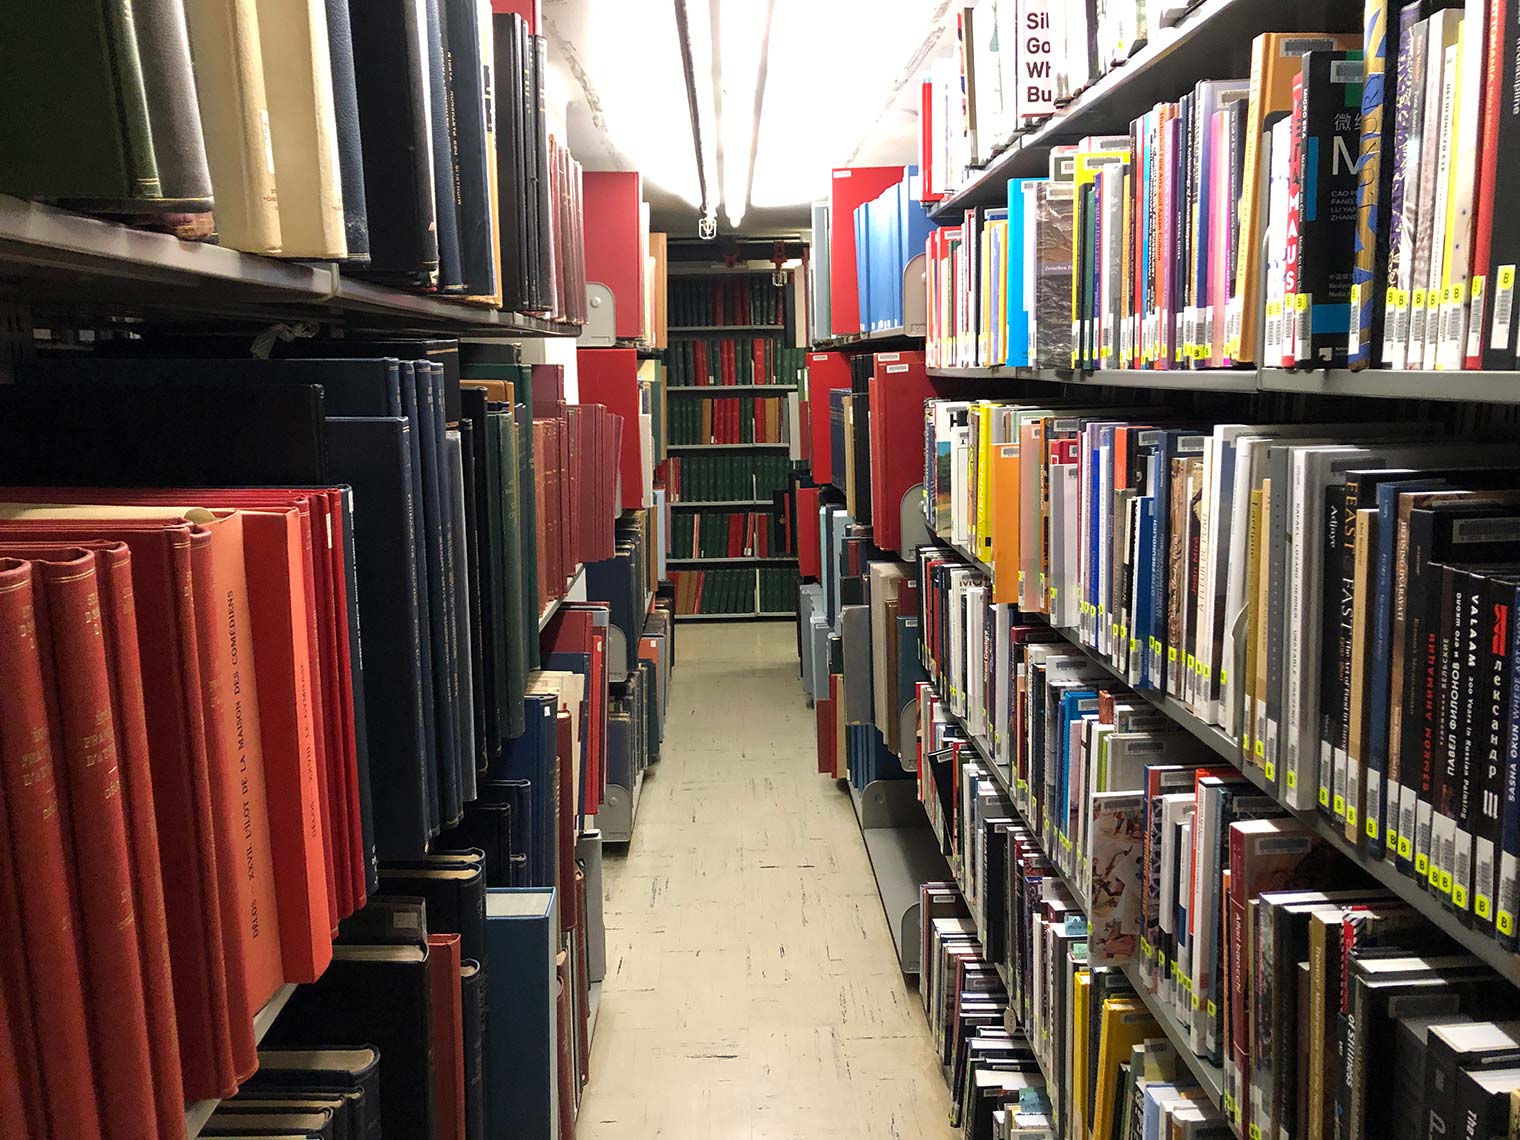 Brightly lit library stacks